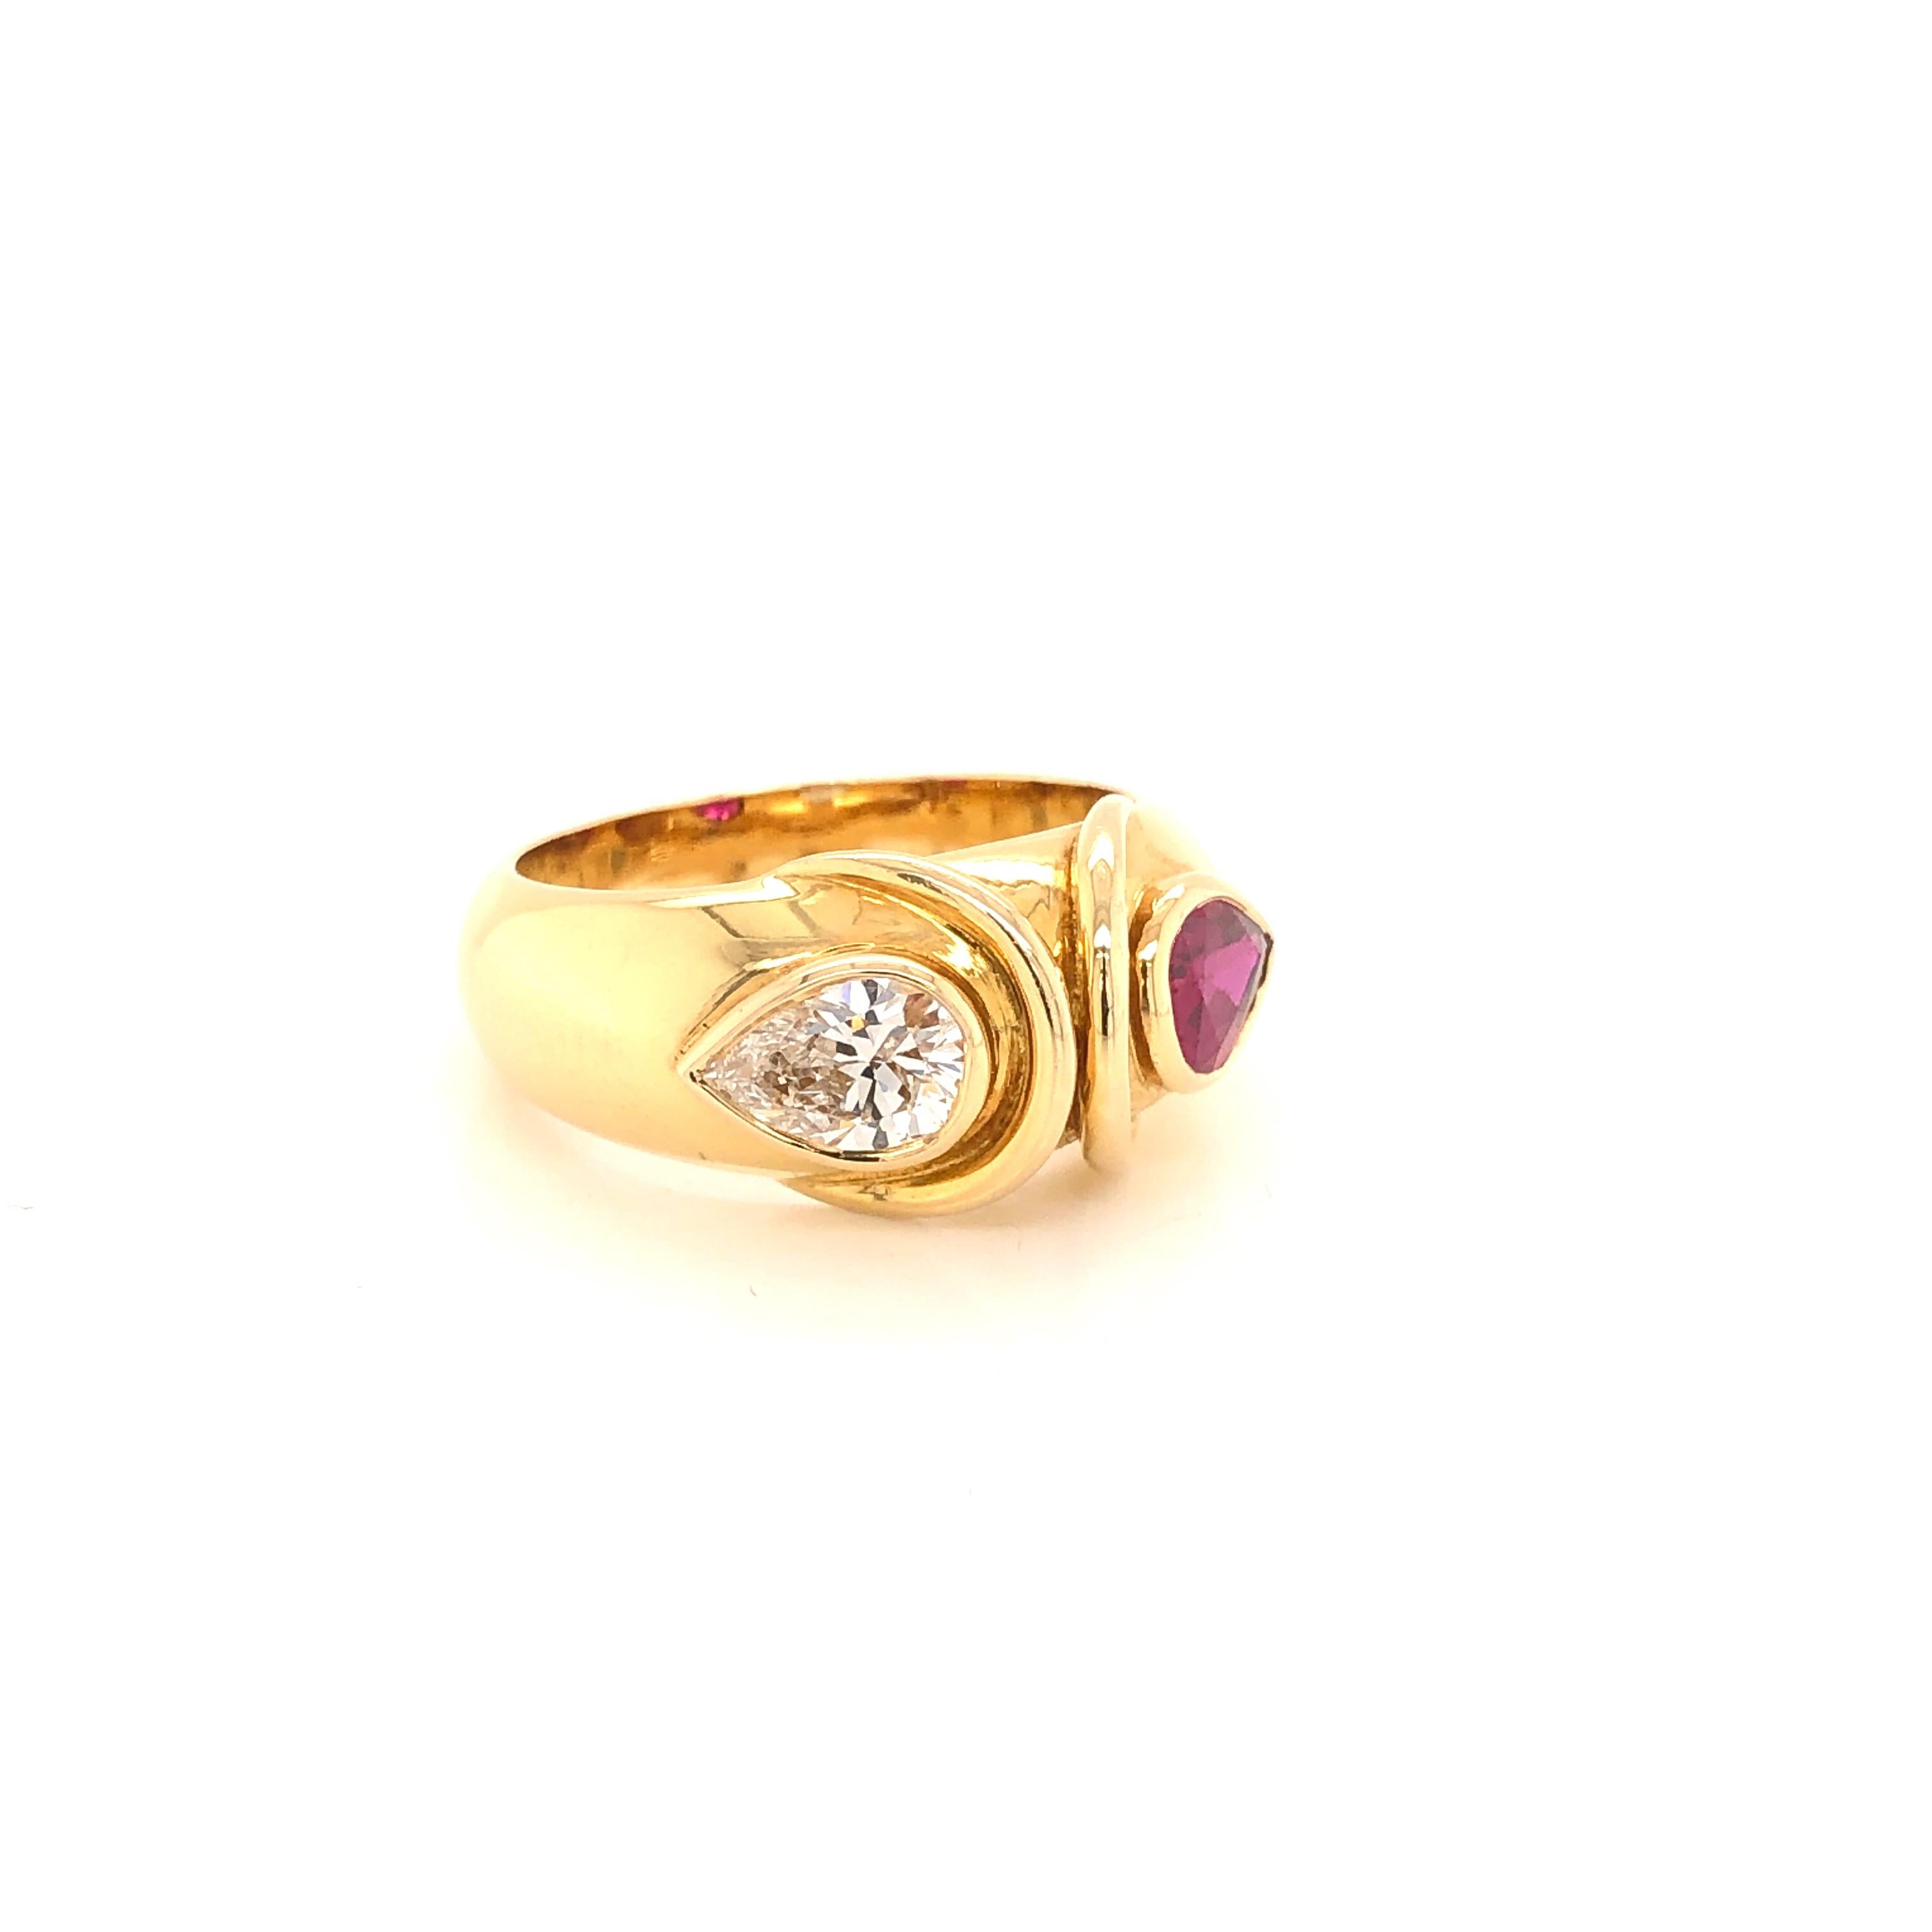 Amazing design from the jewelry house FRED.  This amazing ring is handcrafted in 18k yellow gold. The wide band design showcases two gemstones Diamond and Ruby.  Simplistic yet elegant, this ring is sure to stand out whenever worn. The Diamond is